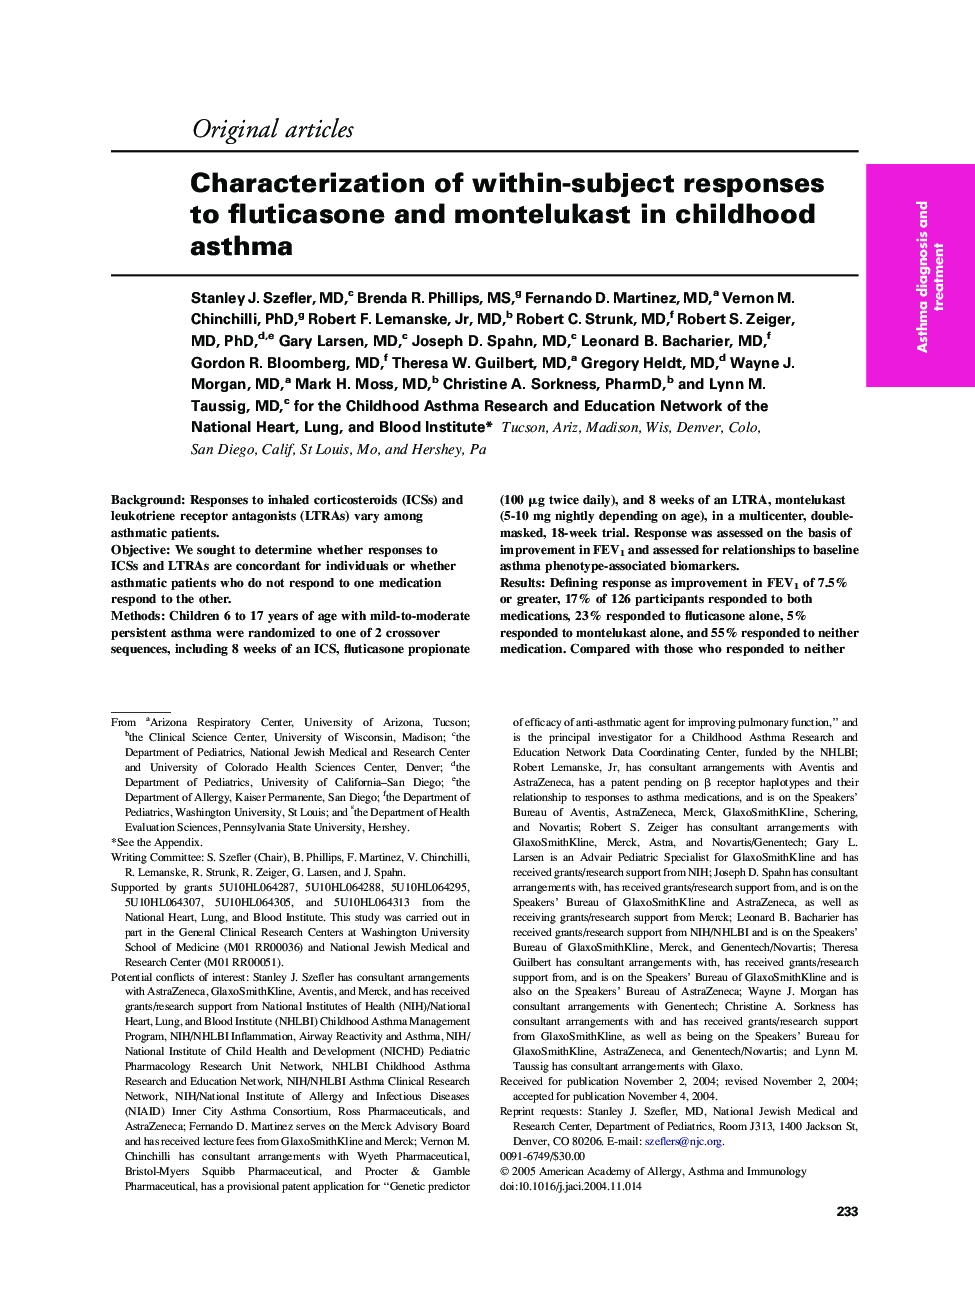 Characterization of within-subject responses to fluticasone and montelukast in childhood asthma